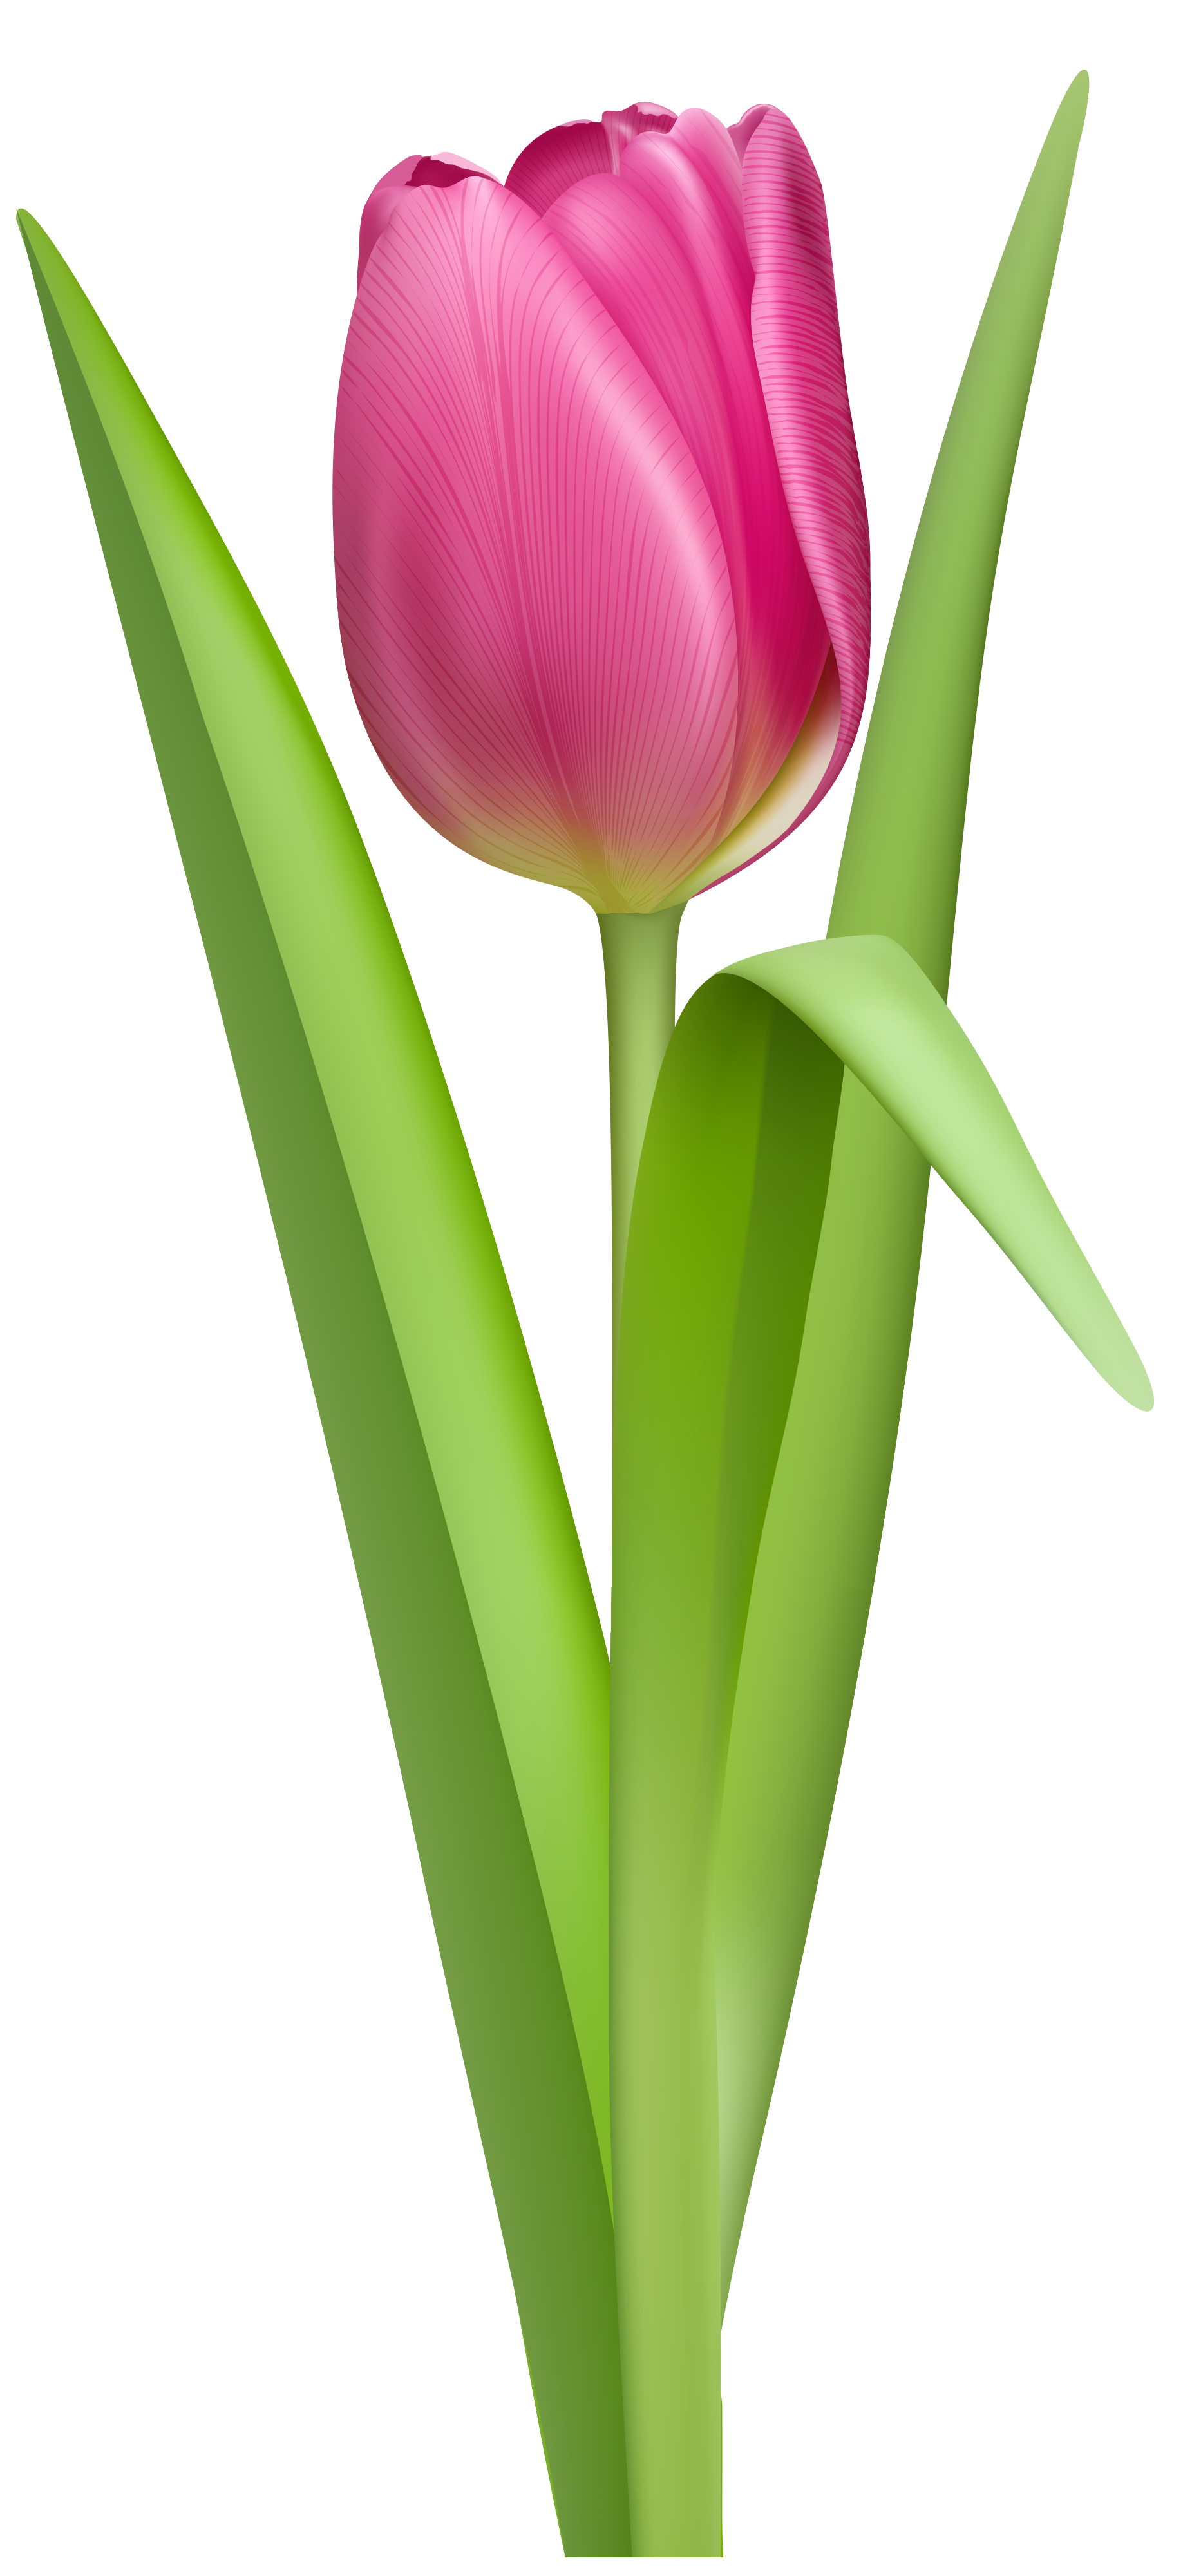 Pink Tulip Download Hd Image Clipart